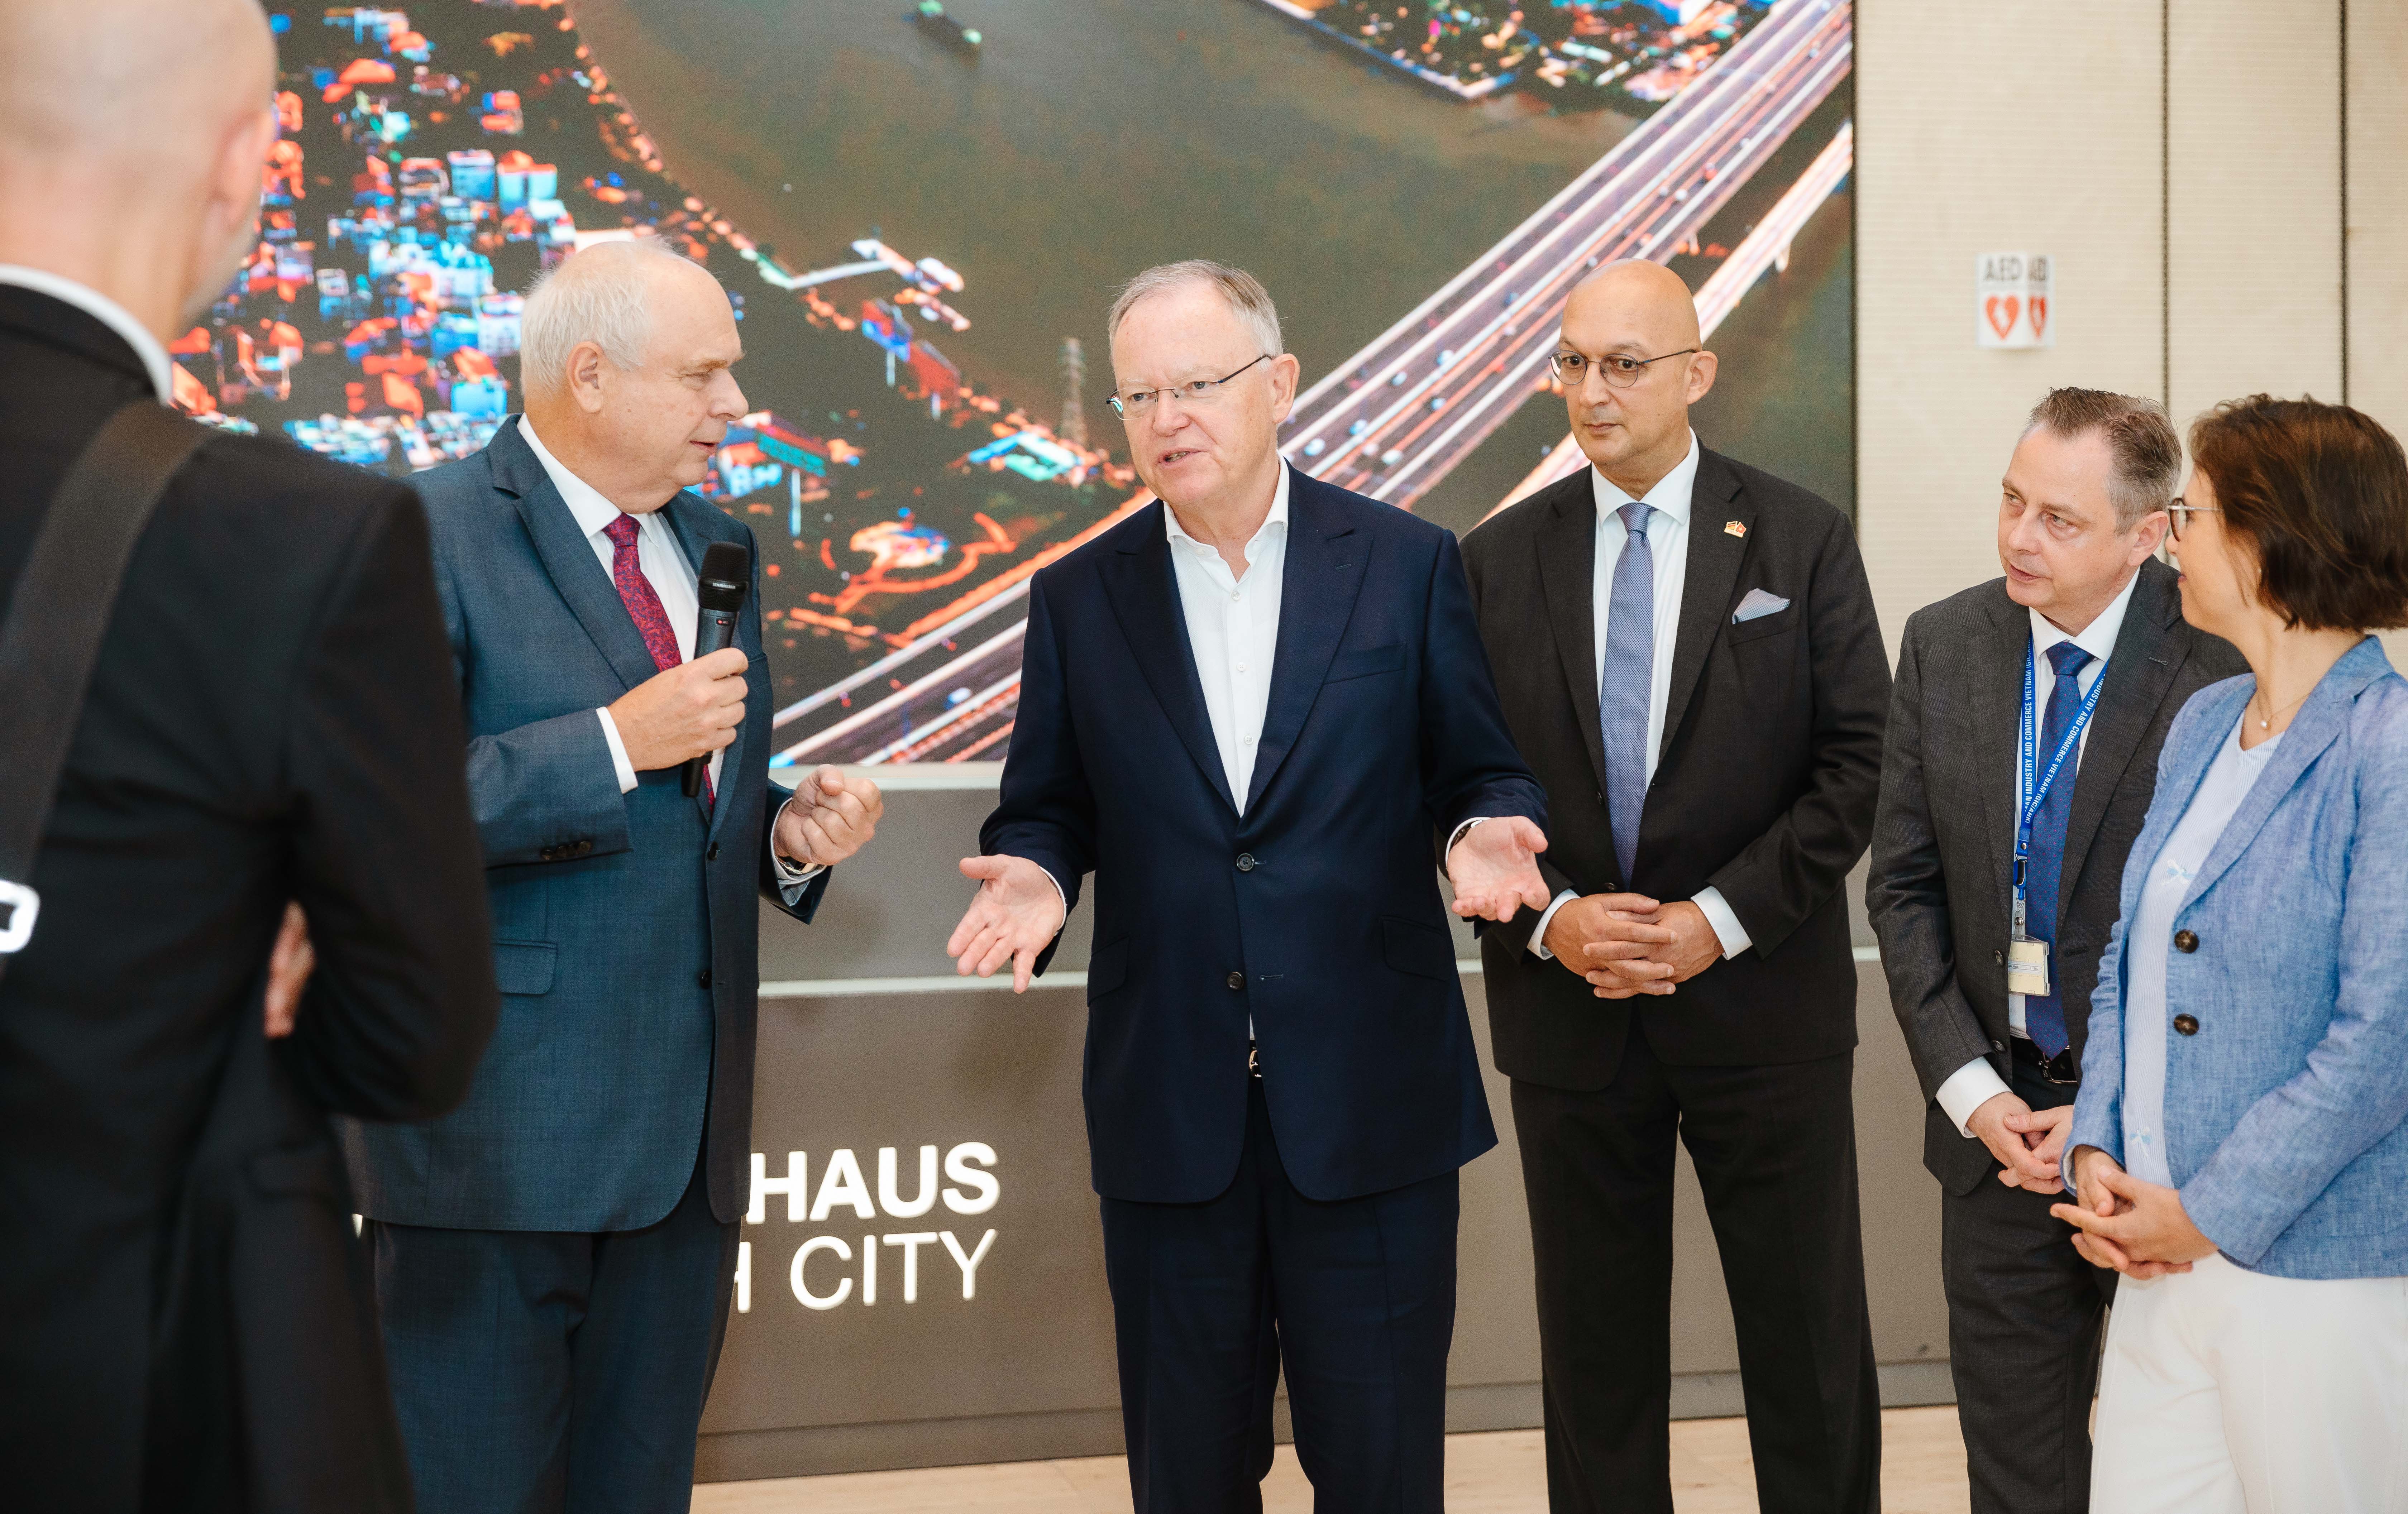 MINISTER PRESIDENT OF LOWER SAXONY, STEPHAN WEIL VISITS DEUTSCHES HAUS HO CHI MINH CITY